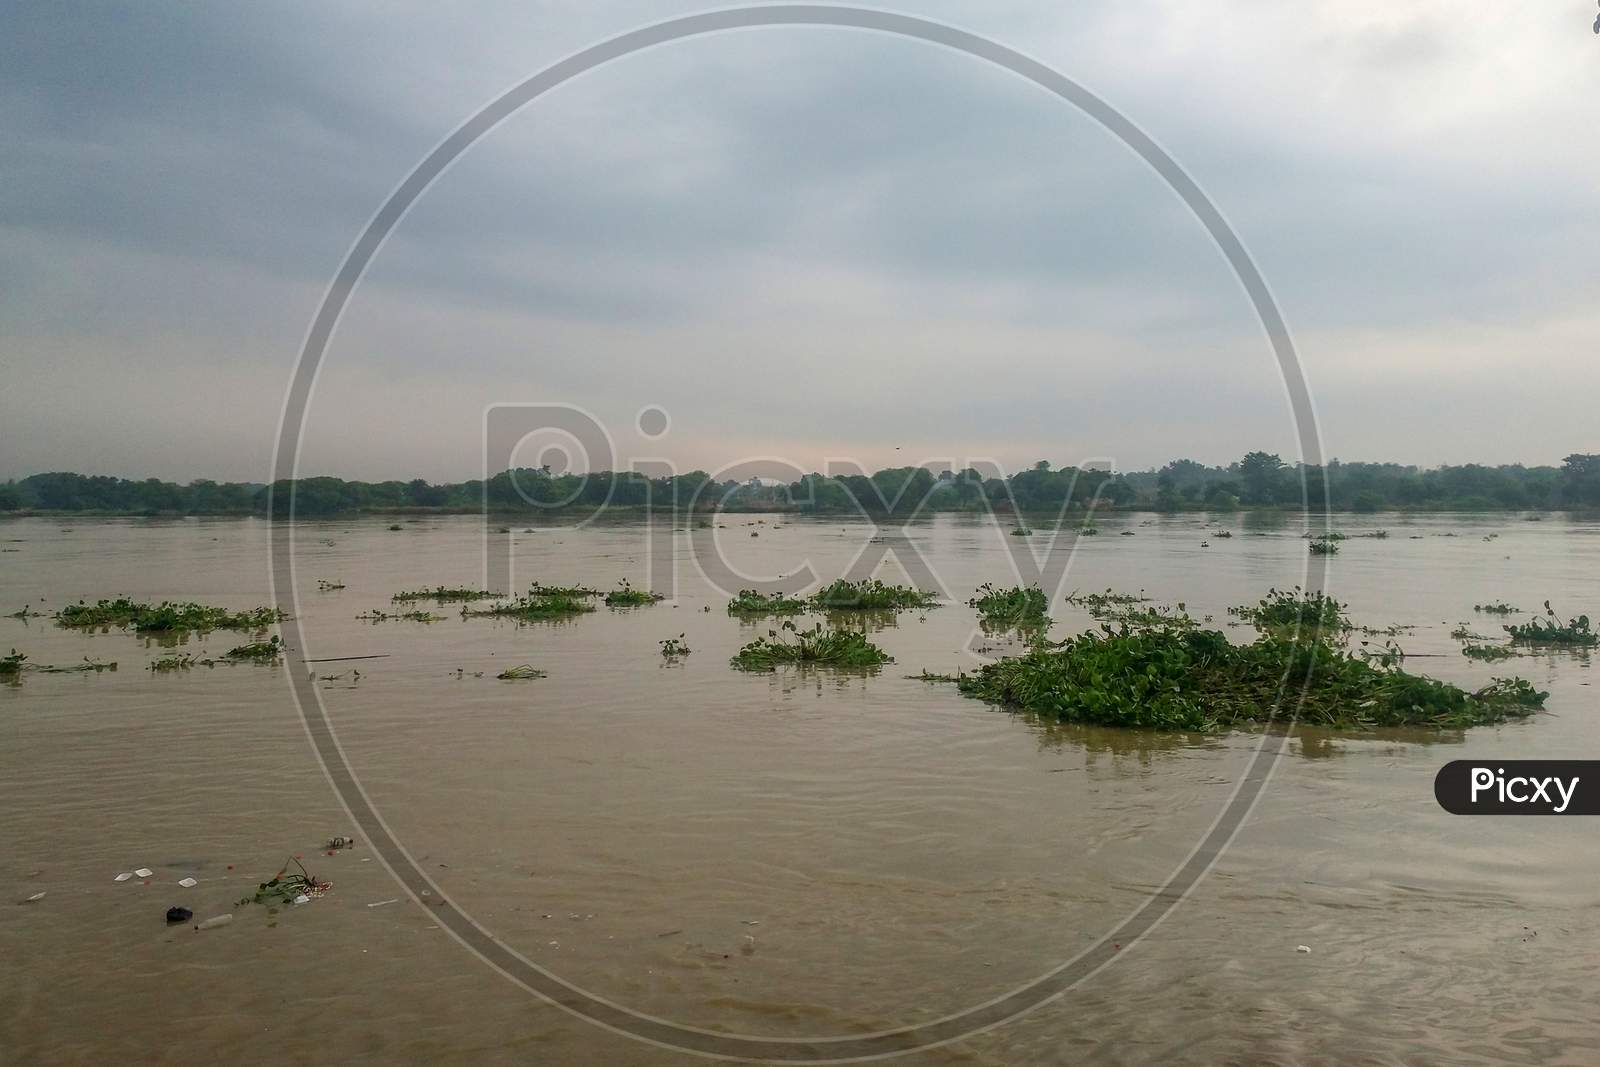 Image of flood on the Ganges river after heavy rain in West Bengal of India